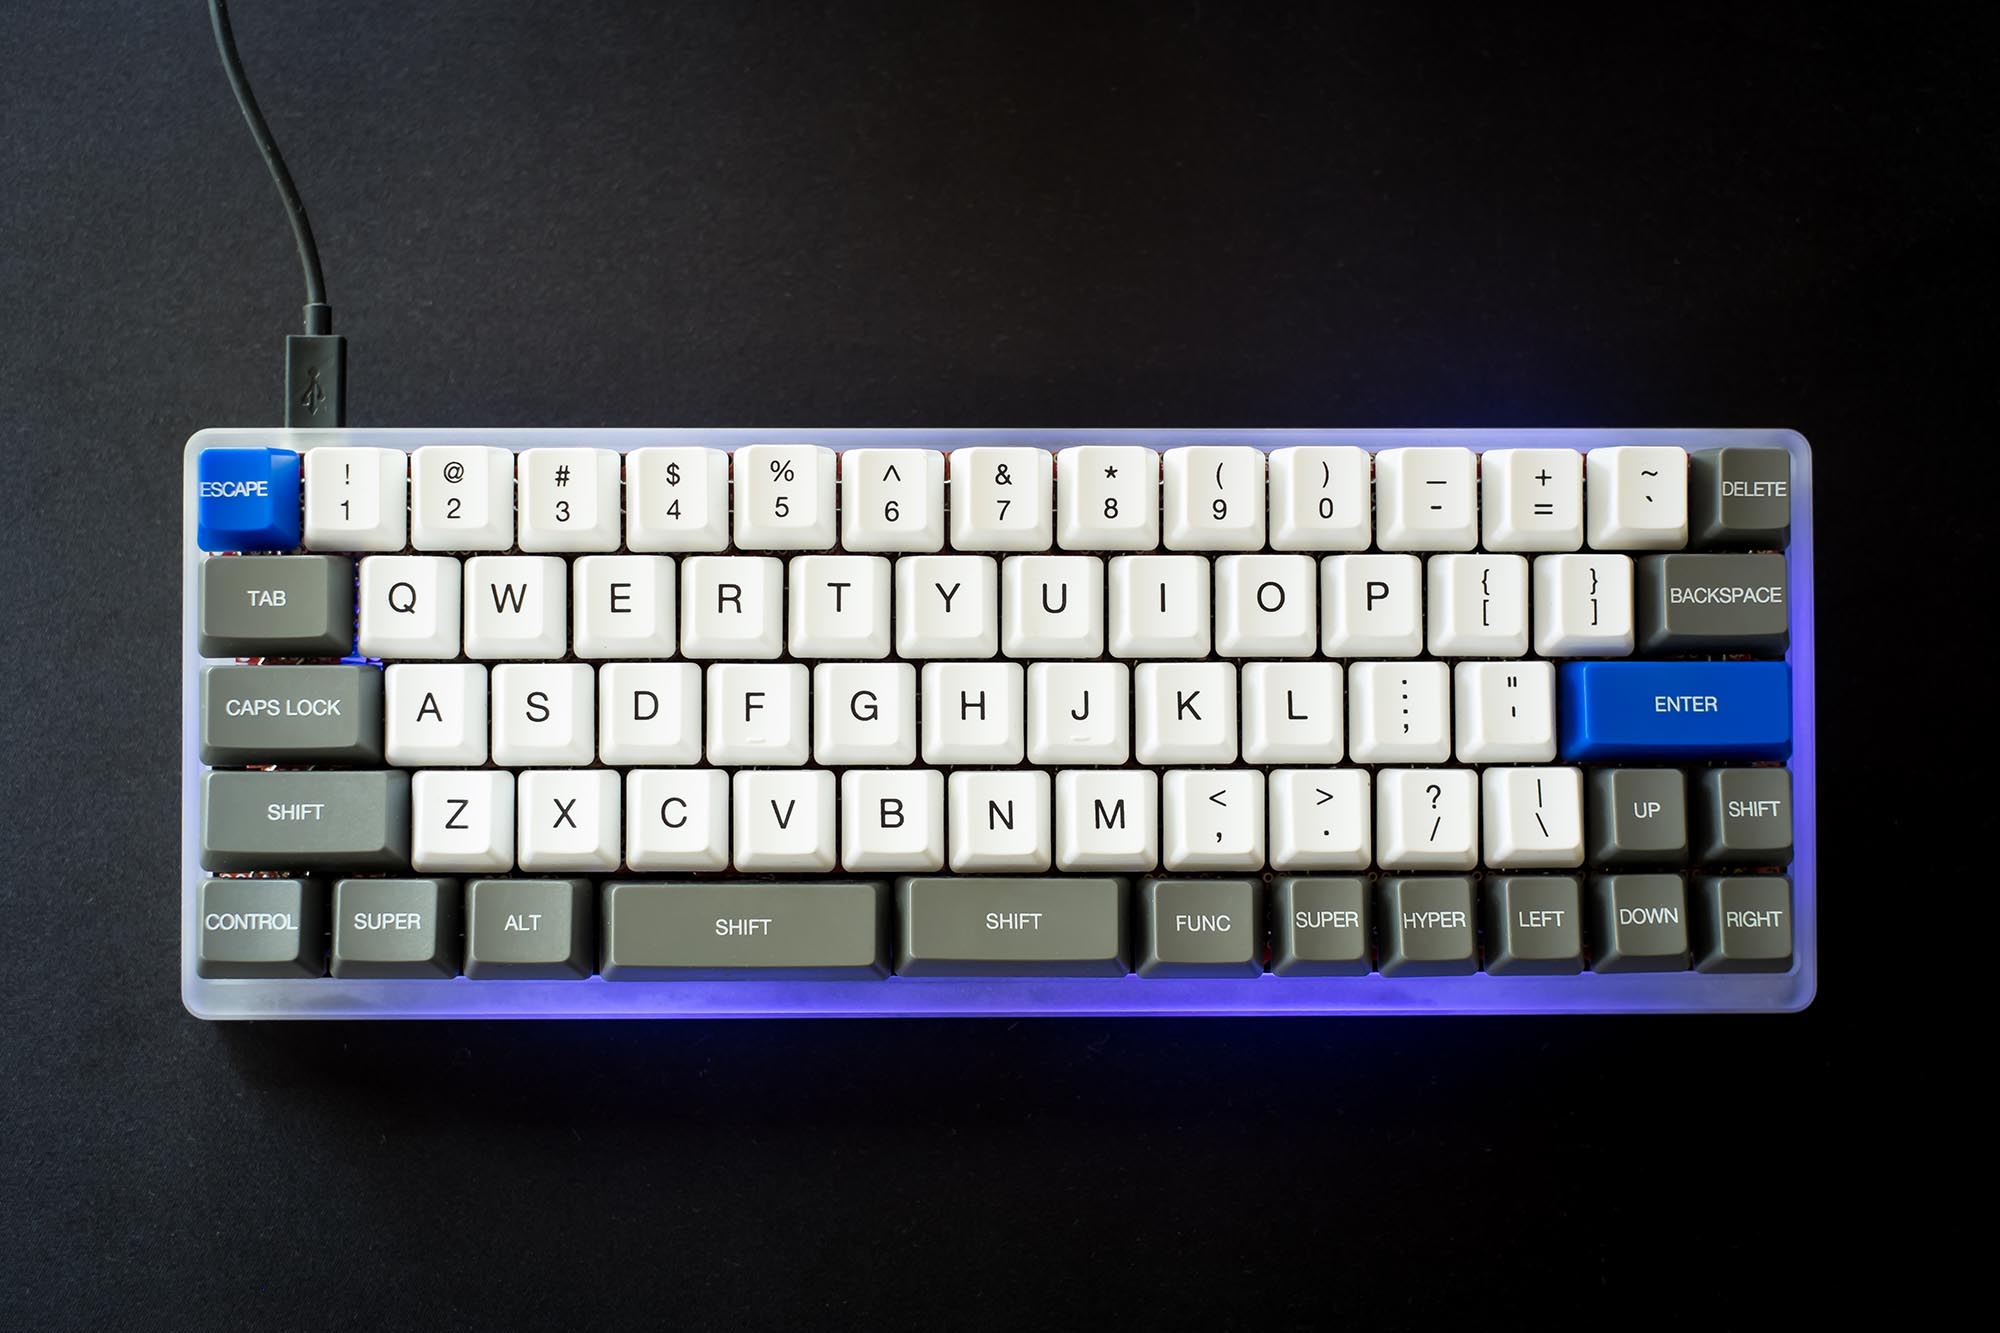 Top view of keyboard with acrylic case and purple glowing LEDs